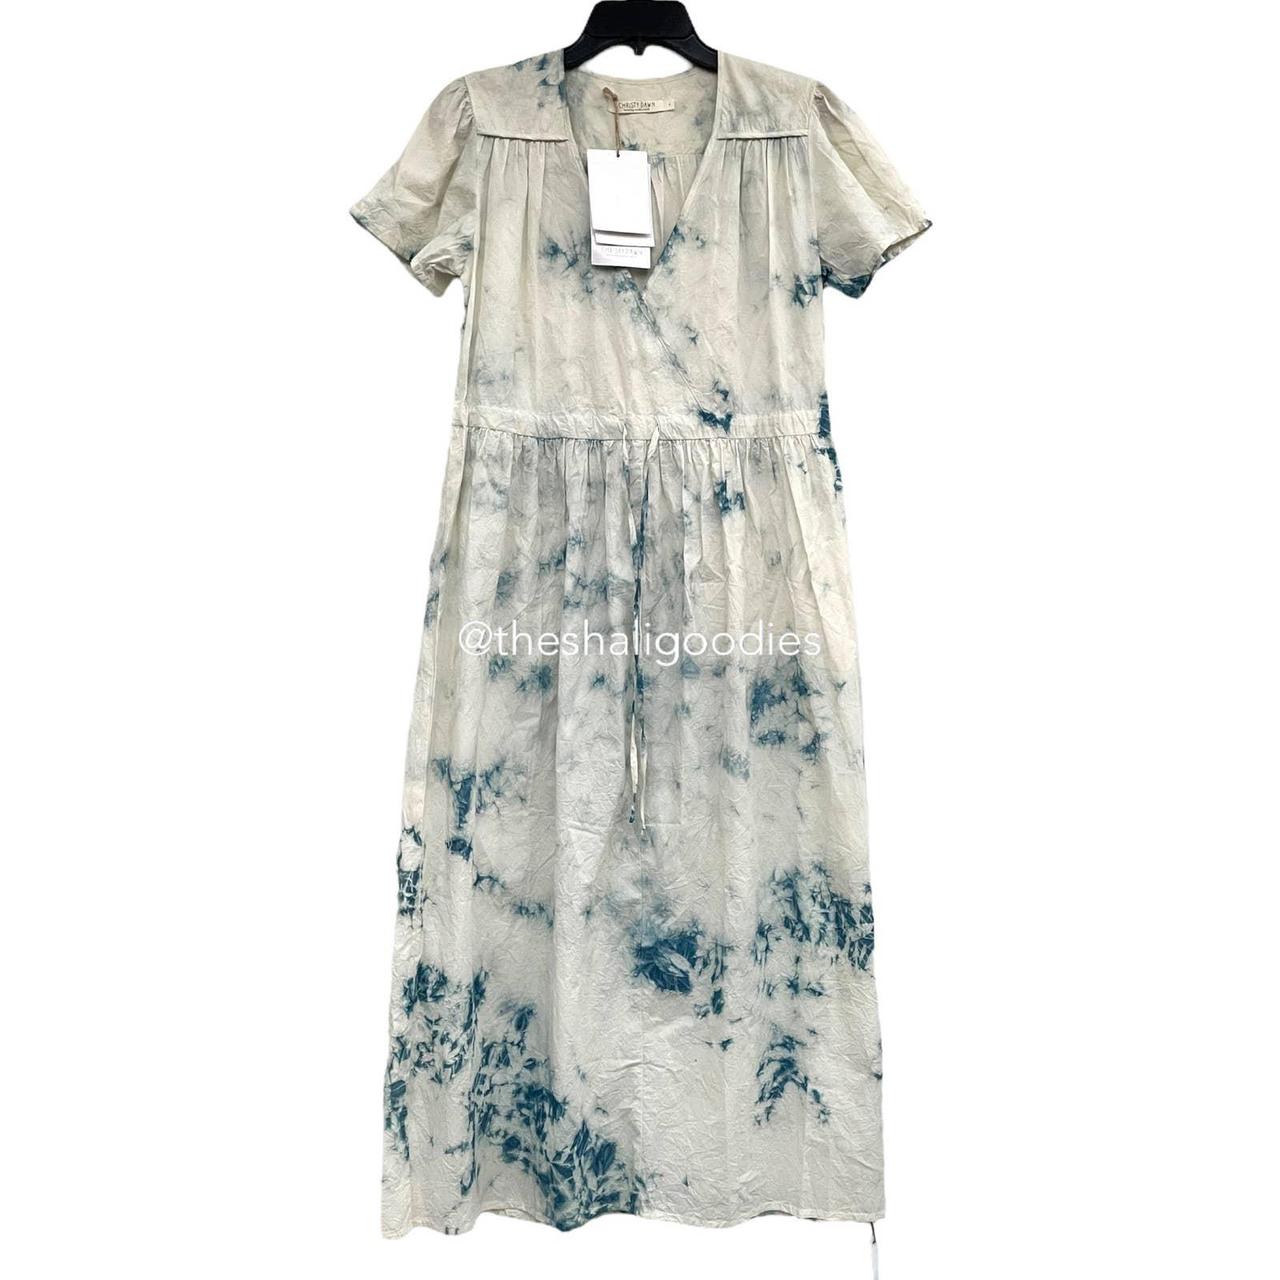 Product Image 1 - CHRISTY DAWN Dawn Dress

**Actual color